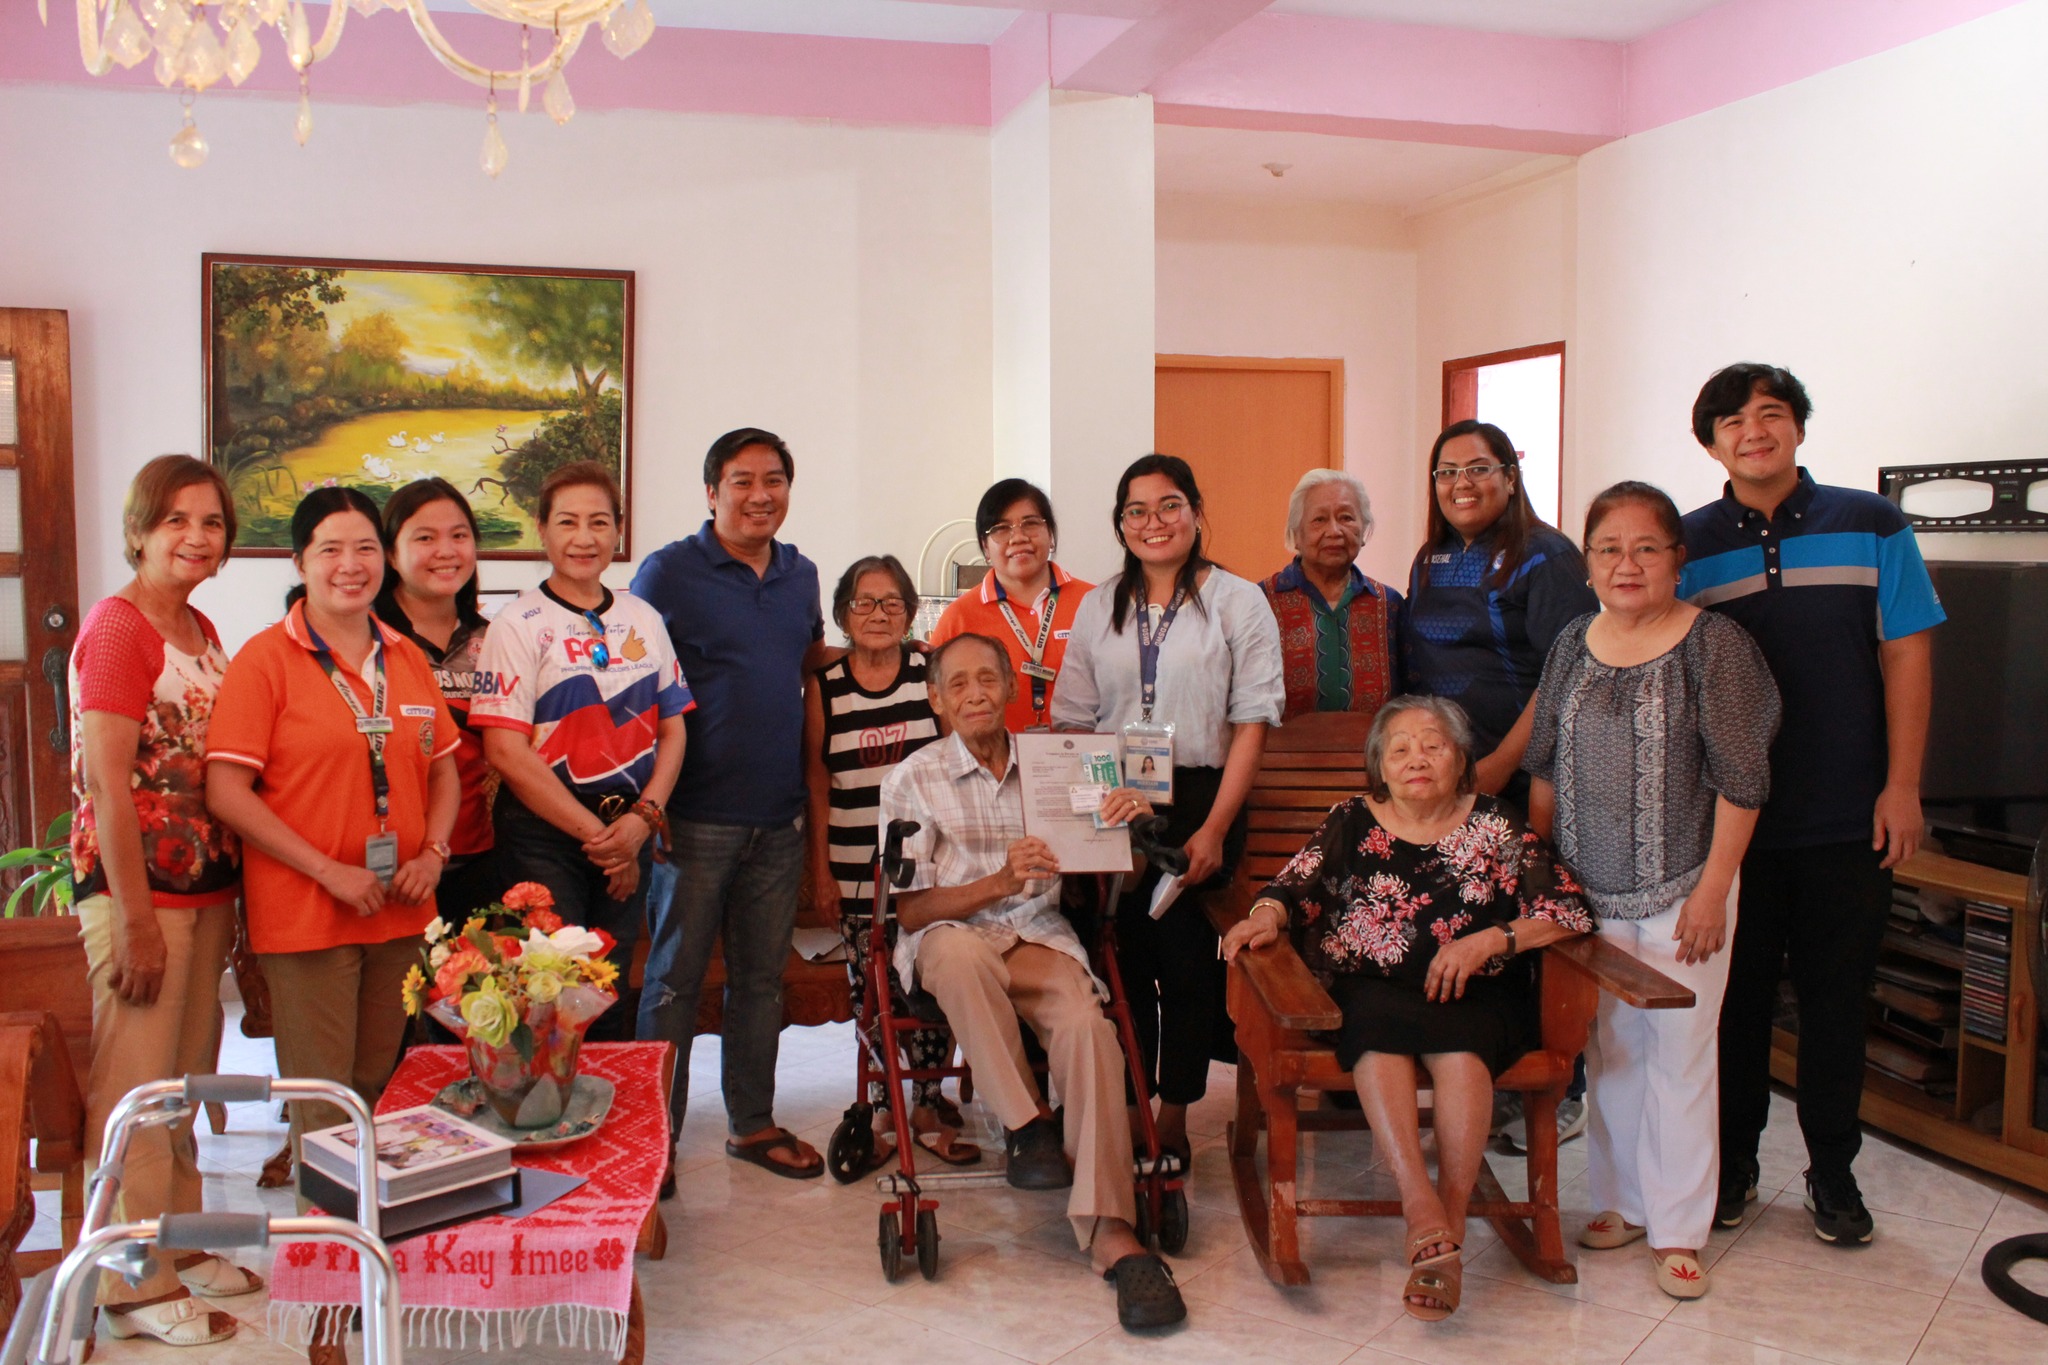 Awarding of the Php 100,000.00 cash gift for our centenarians